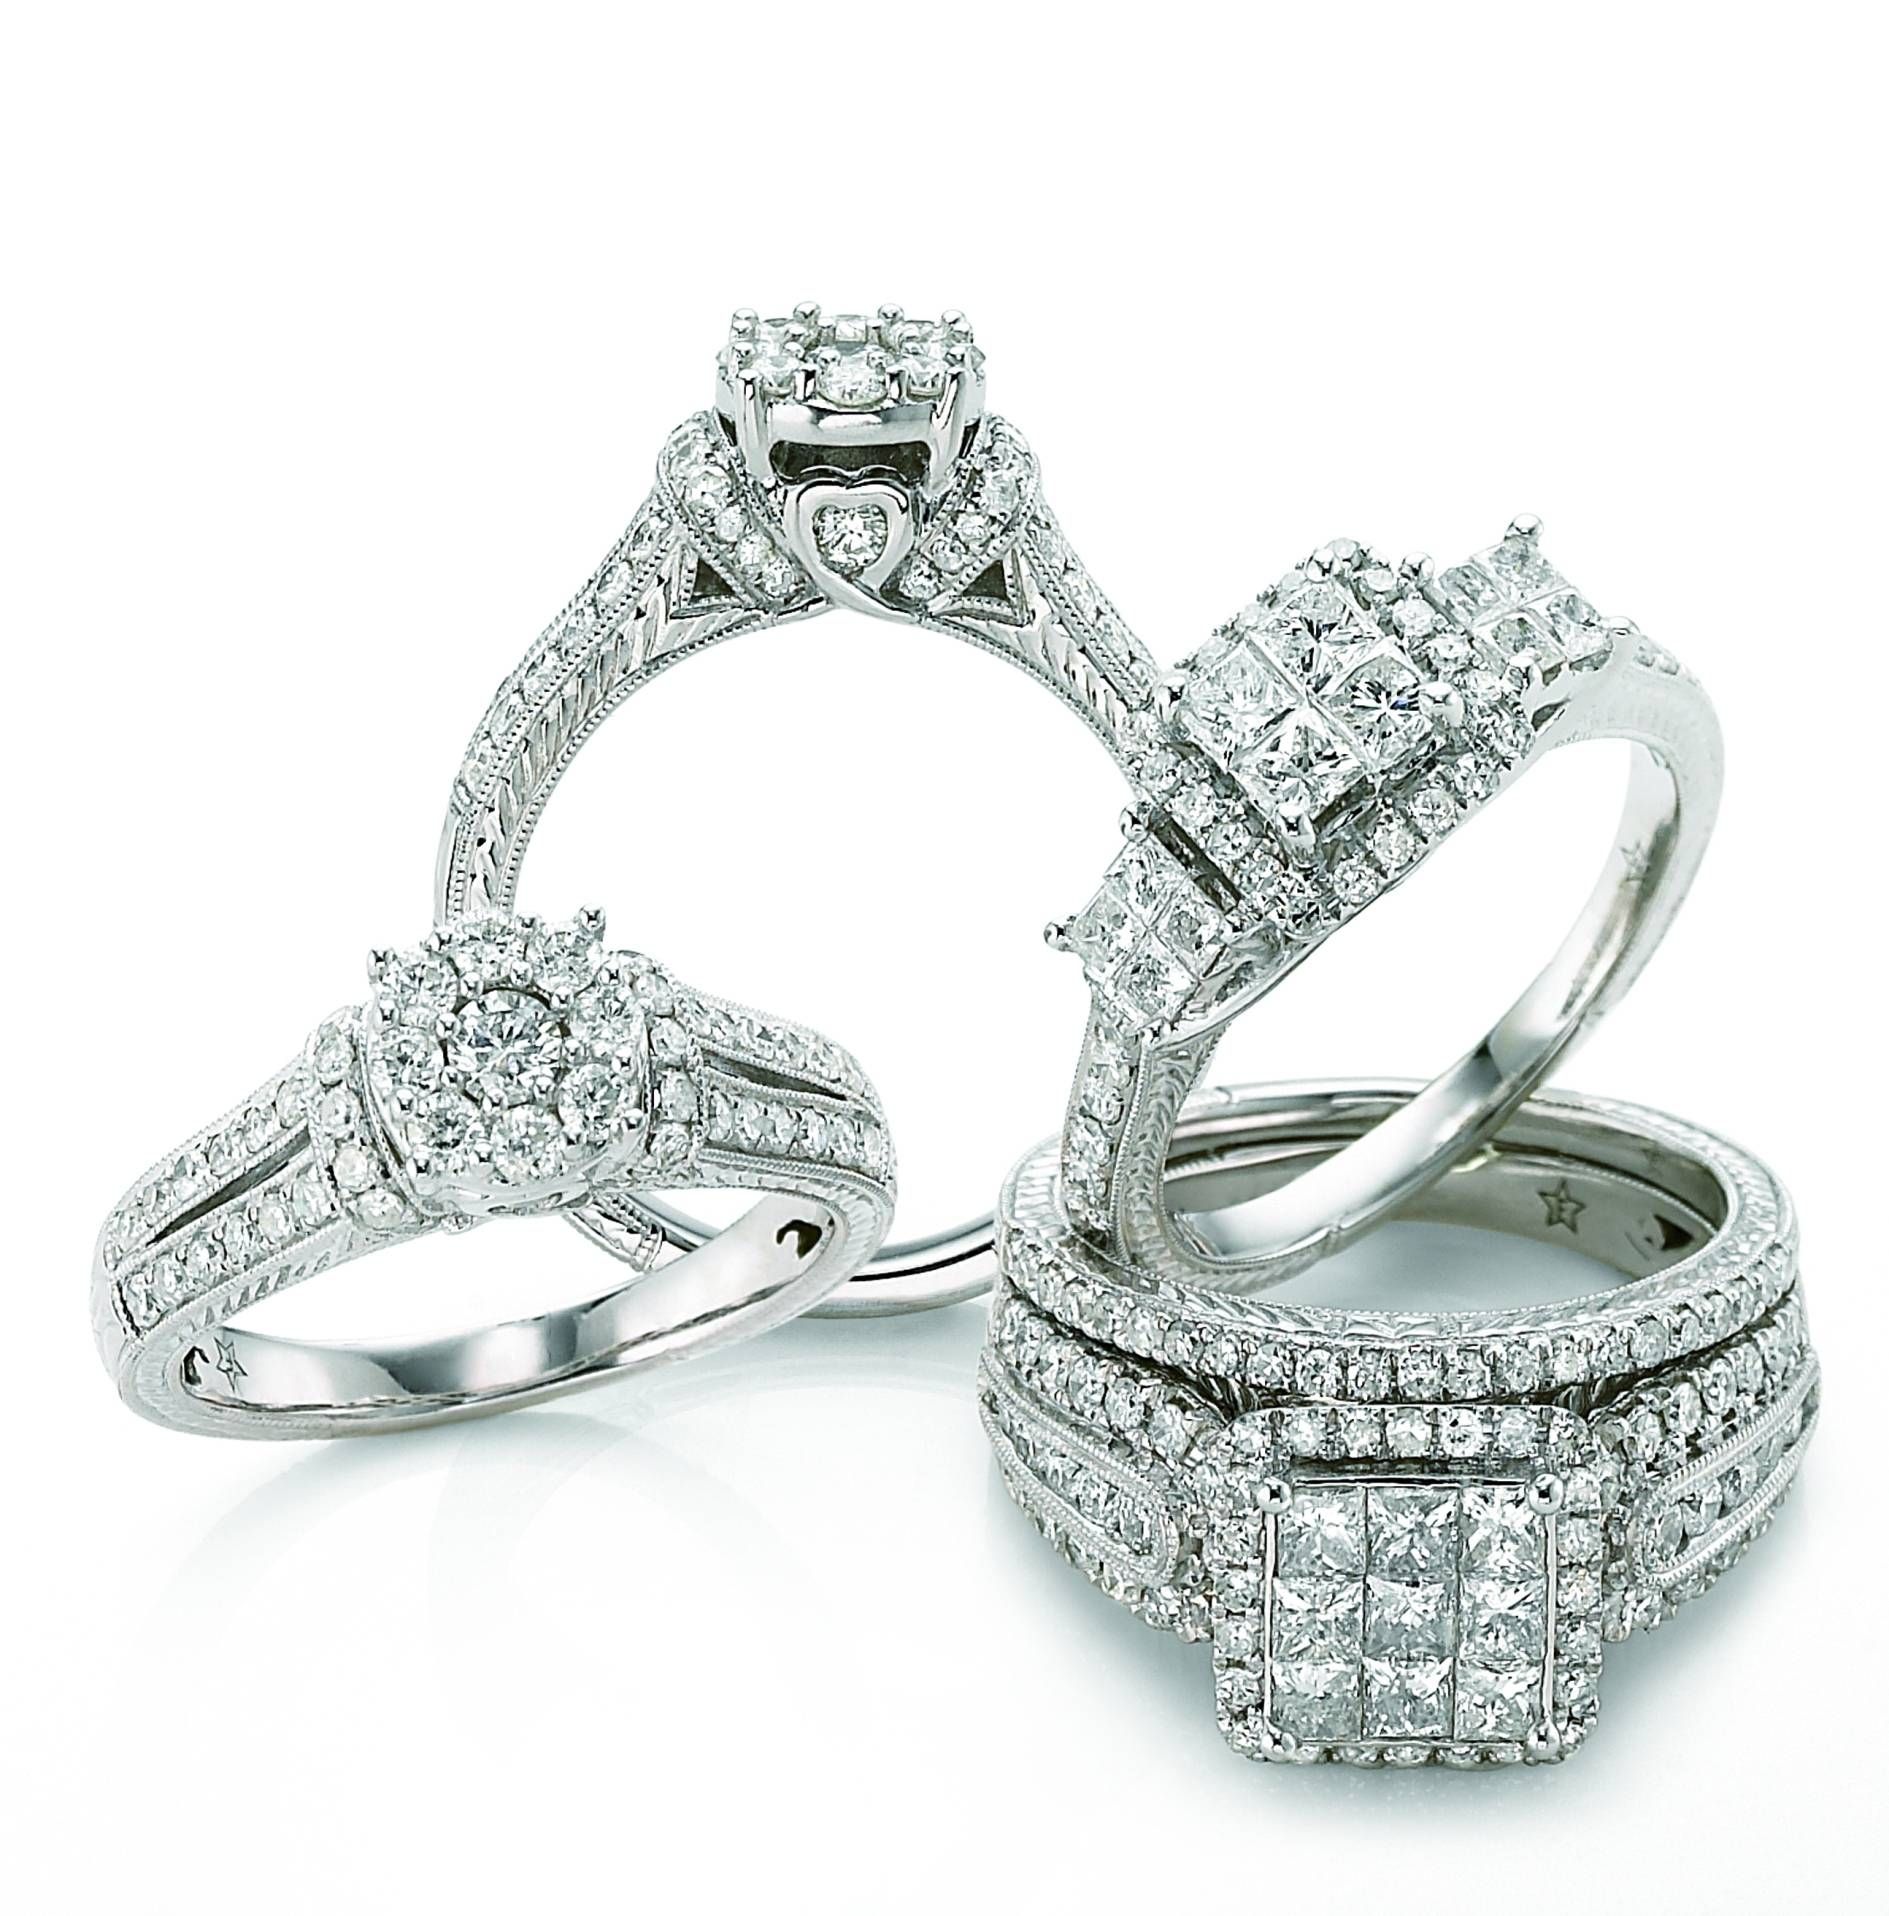 Jcpenney Diamond Rings | Wedding, Promise, Diamond, Engagement Throughout Jcpenney Jewelry Wedding Bands (View 3 of 15)